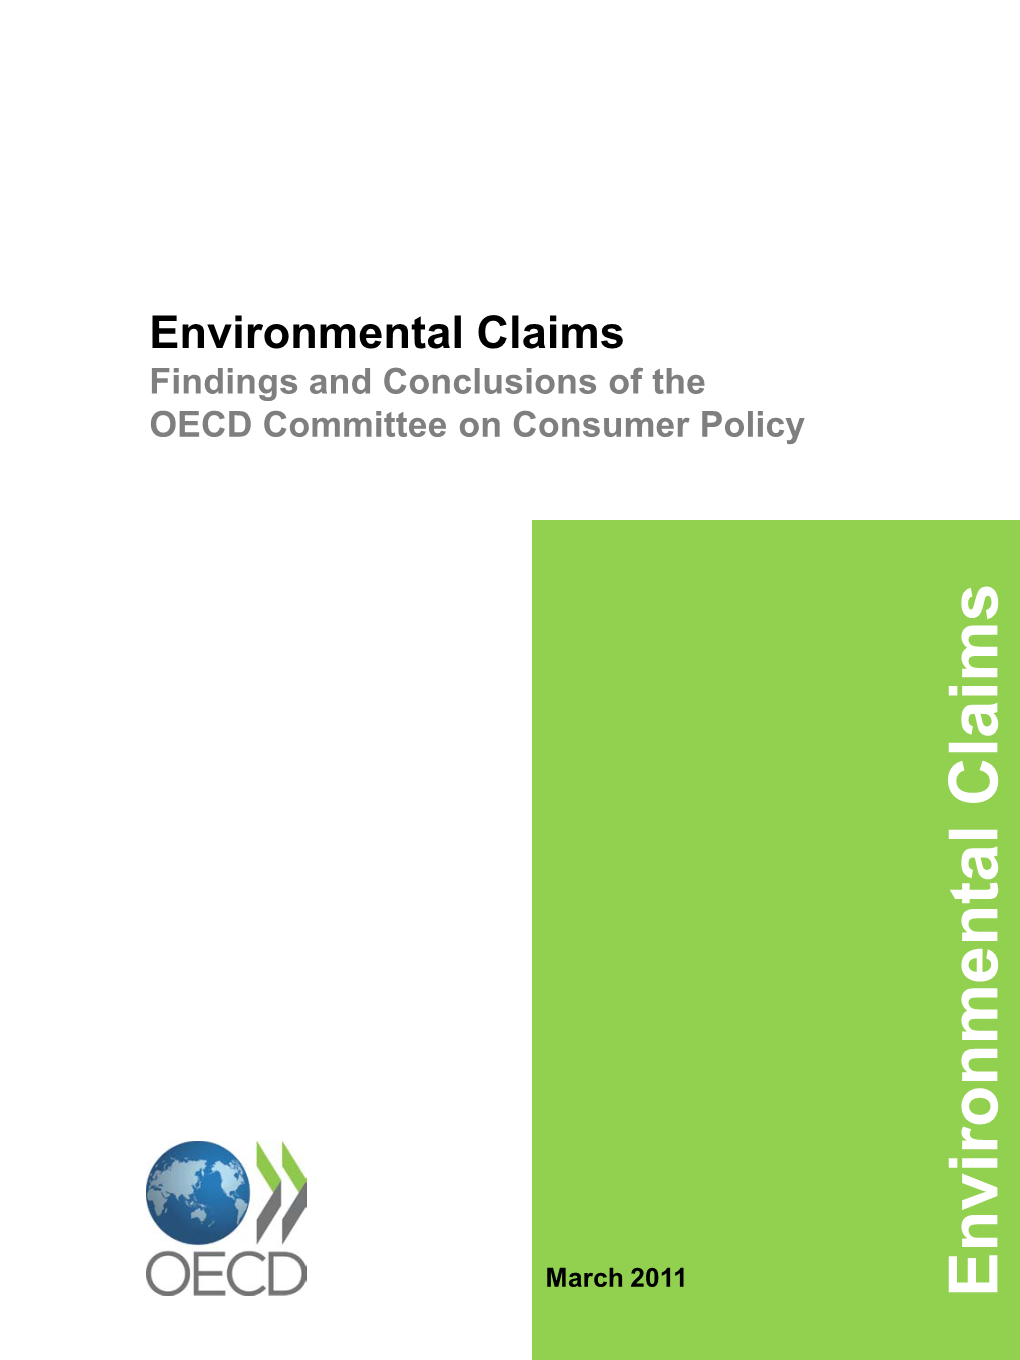 Environmental Claims Findings and Conclusions of the OECD Committee on Consumer Policy